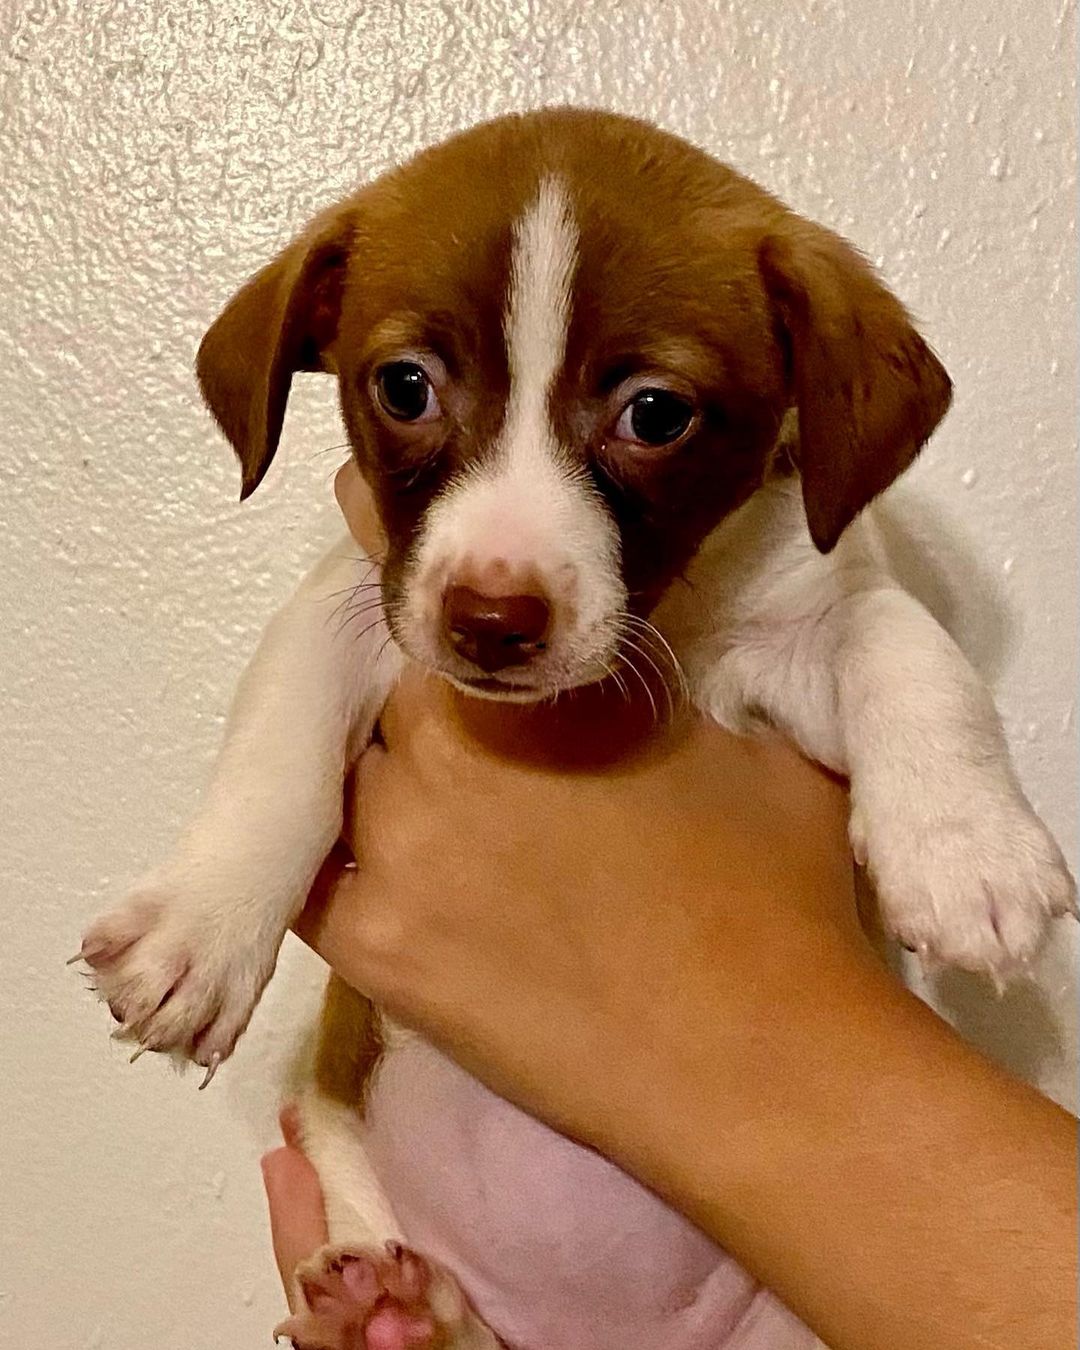 Puppies!!! 🐶🥰❤️
10 week old terrier mixes are up for adoption. Please contact us if you are interested in Qualifying to adopt a give a puppy a forever home! Contact Findingabestfriend@gmail.com 
Meet <a target='_blank' href='https://www.instagram.com/explore/tags/adoptable/'>#adoptable</a> dogs and puppies looking for their <a target='_blank' href='https://www.instagram.com/explore/tags/fureverhomes/'>#fureverhomes</a> with @findingabestfriend ❤️
.
.
.
.
<a target='_blank' href='https://www.instagram.com/explore/tags/rescuedogs/'>#rescuedogs</a> <a target='_blank' href='https://www.instagram.com/explore/tags/adoptdontshop/'>#adoptdontshop</a> <a target='_blank' href='https://www.instagram.com/explore/tags/dogadoption/'>#dogadoption</a> <a target='_blank' href='https://www.instagram.com/explore/tags/sanramon/'>#sanramon</a> <a target='_blank' href='https://www.instagram.com/explore/tags/adoptme/'>#adoptme</a> <a target='_blank' href='https://www.instagram.com/explore/tags/sfbayarea/'>#sfbayarea</a> <a target='_blank' href='https://www.instagram.com/explore/tags/myfavoritebreedisrescued/'>#myfavoritebreedisrescued</a> <a target='_blank' href='https://www.instagram.com/explore/tags/stockton/'>#stockton</a> <a target='_blank' href='https://www.instagram.com/explore/tags/sacramento/'>#sacramento</a> <a target='_blank' href='https://www.instagram.com/explore/tags/sanfrancisco/'>#sanfrancisco</a> <a target='_blank' href='https://www.instagram.com/explore/tags/dogsofinstagram/'>#dogsofinstagram</a> <a target='_blank' href='https://www.instagram.com/explore/tags/puppies/'>#puppies</a> <a target='_blank' href='https://www.instagram.com/explore/tags/puppiesofinstagram/'>#puppiesofinstagram</a> <a target='_blank' href='https://www.instagram.com/explore/tags/dontbullymybreed/'>#dontbullymybreed</a> <a target='_blank' href='https://www.instagram.com/explore/tags/adoptdontshop/'>#adoptdontshop</a> <a target='_blank' href='https://www.instagram.com/explore/tags/puppy/'>#puppy</a>